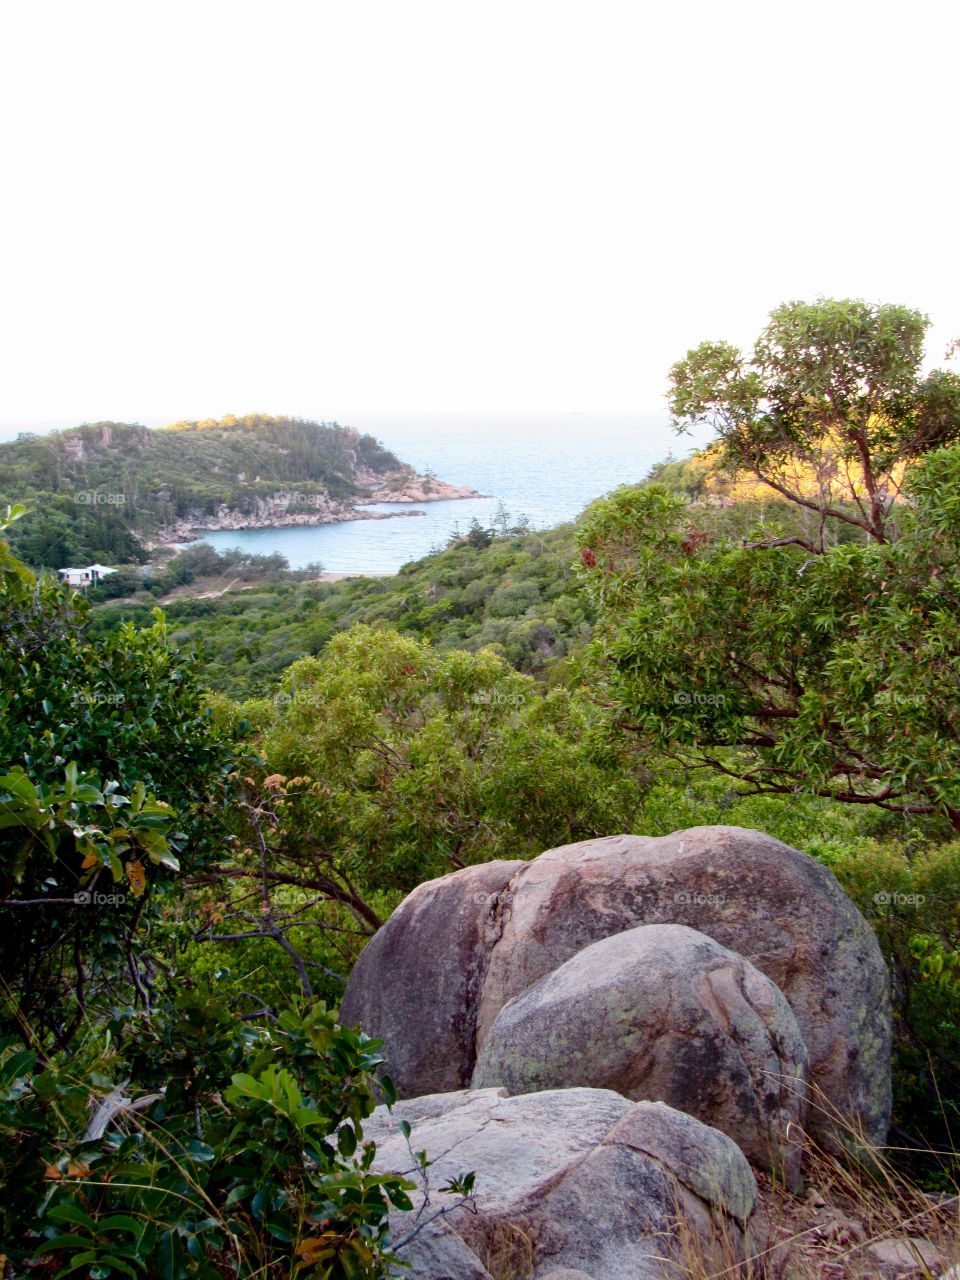 The view from the forts walk on Magnetic island, Townsville, Australia on a beautiful winter day.